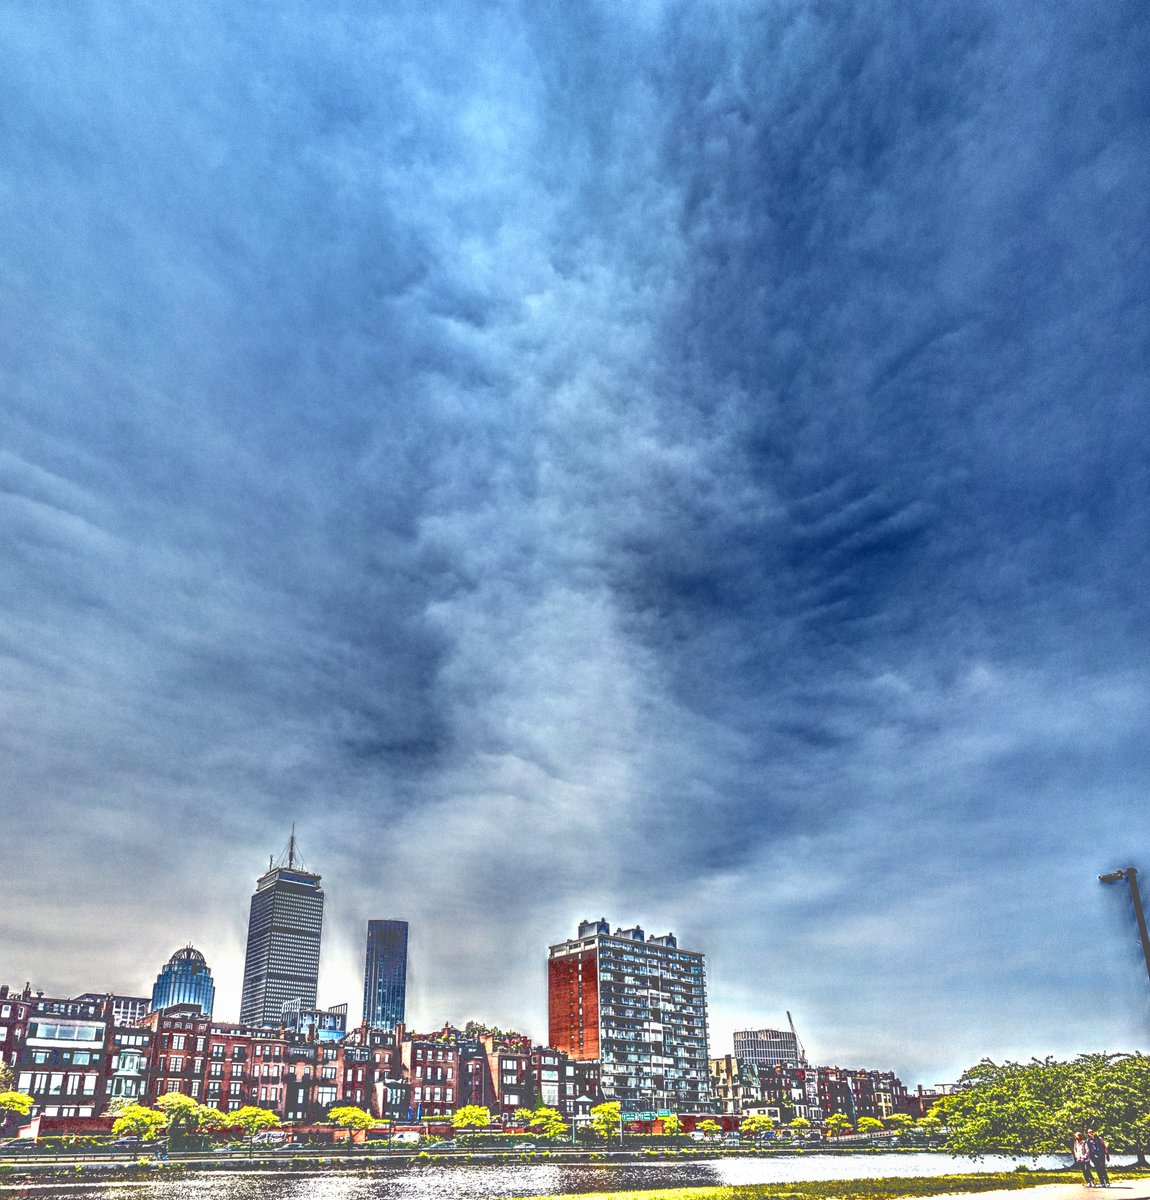 Here's what the arrival of the wildfire smoke from the southeast looked like in Boston at 11:45 a.m. as watched from the Esplanade. I did not retouch any of the individual elements in the photo, I boosted the overall tones and saturation in the image to enhance what was going on…